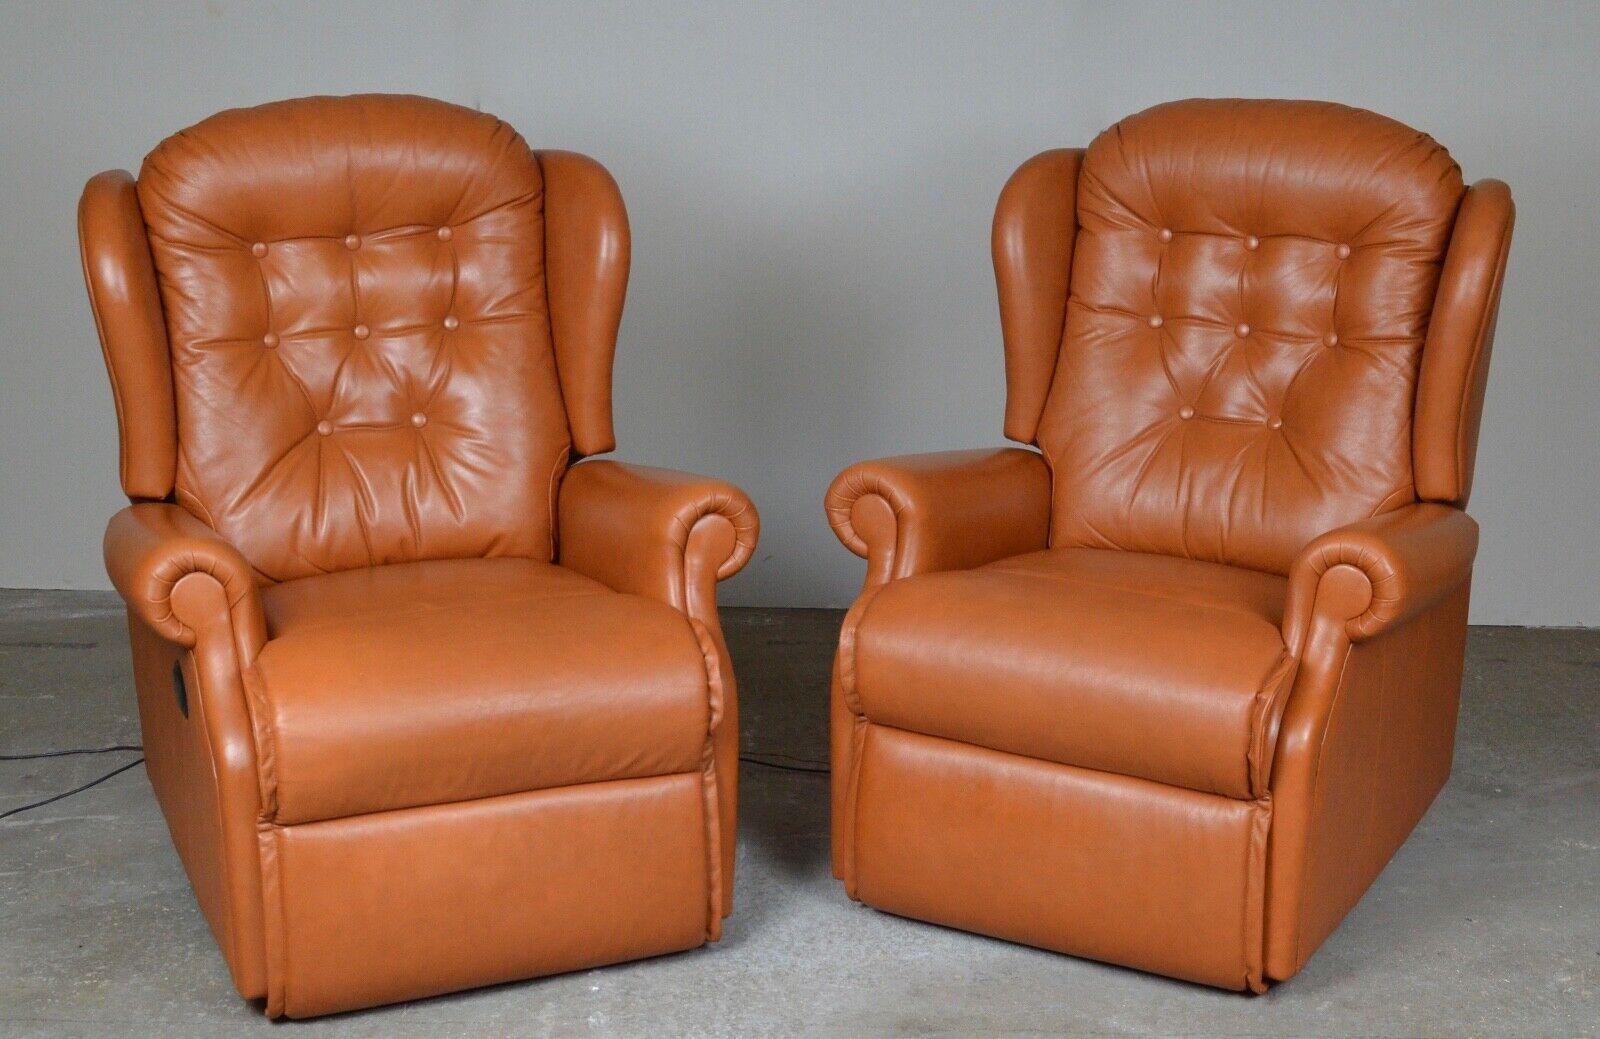 1 of 2 Tan Leather Electric Recliner Armchairs 2